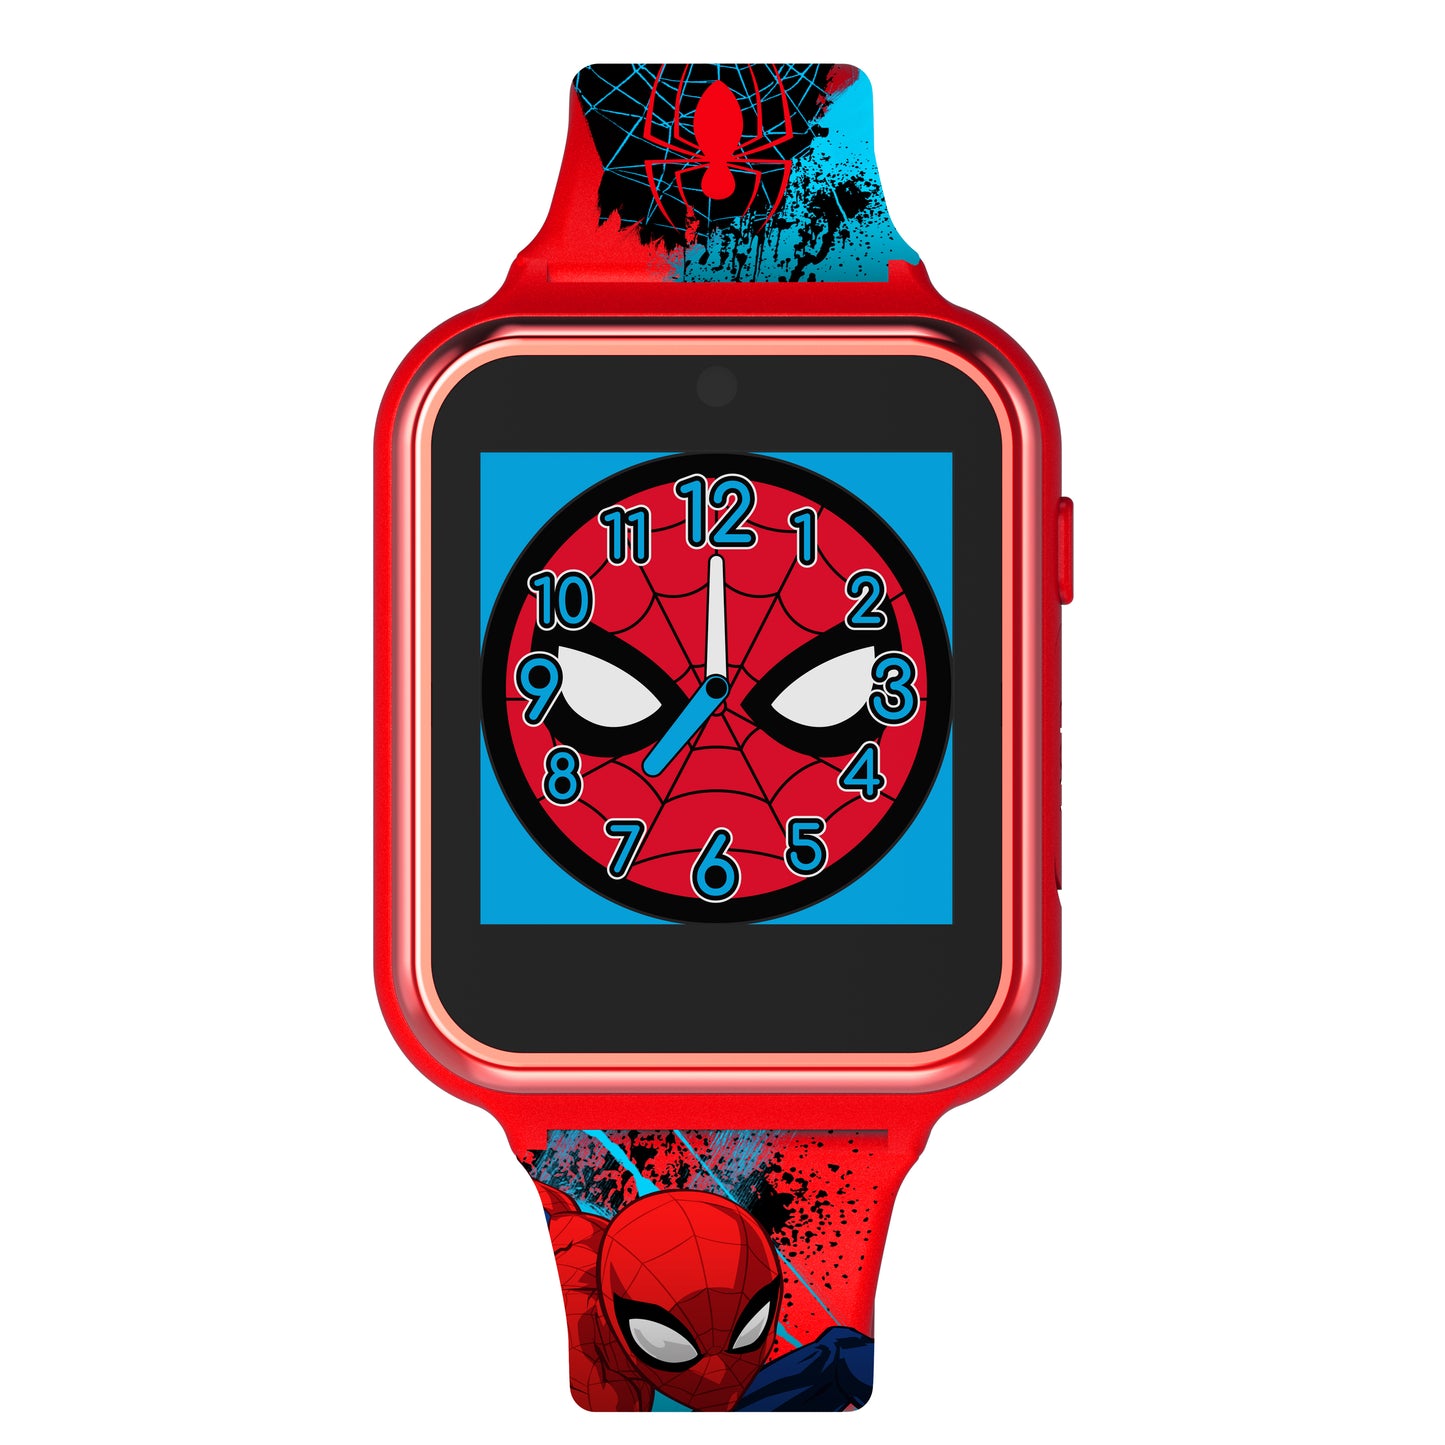 Spiderman iTime Kids Smart Watch - Include: 3 wallpapers, 10 clock faces, step counter, alarm, timer, stopwatch, games, selfie photo & video camera, voice recorder & calculator